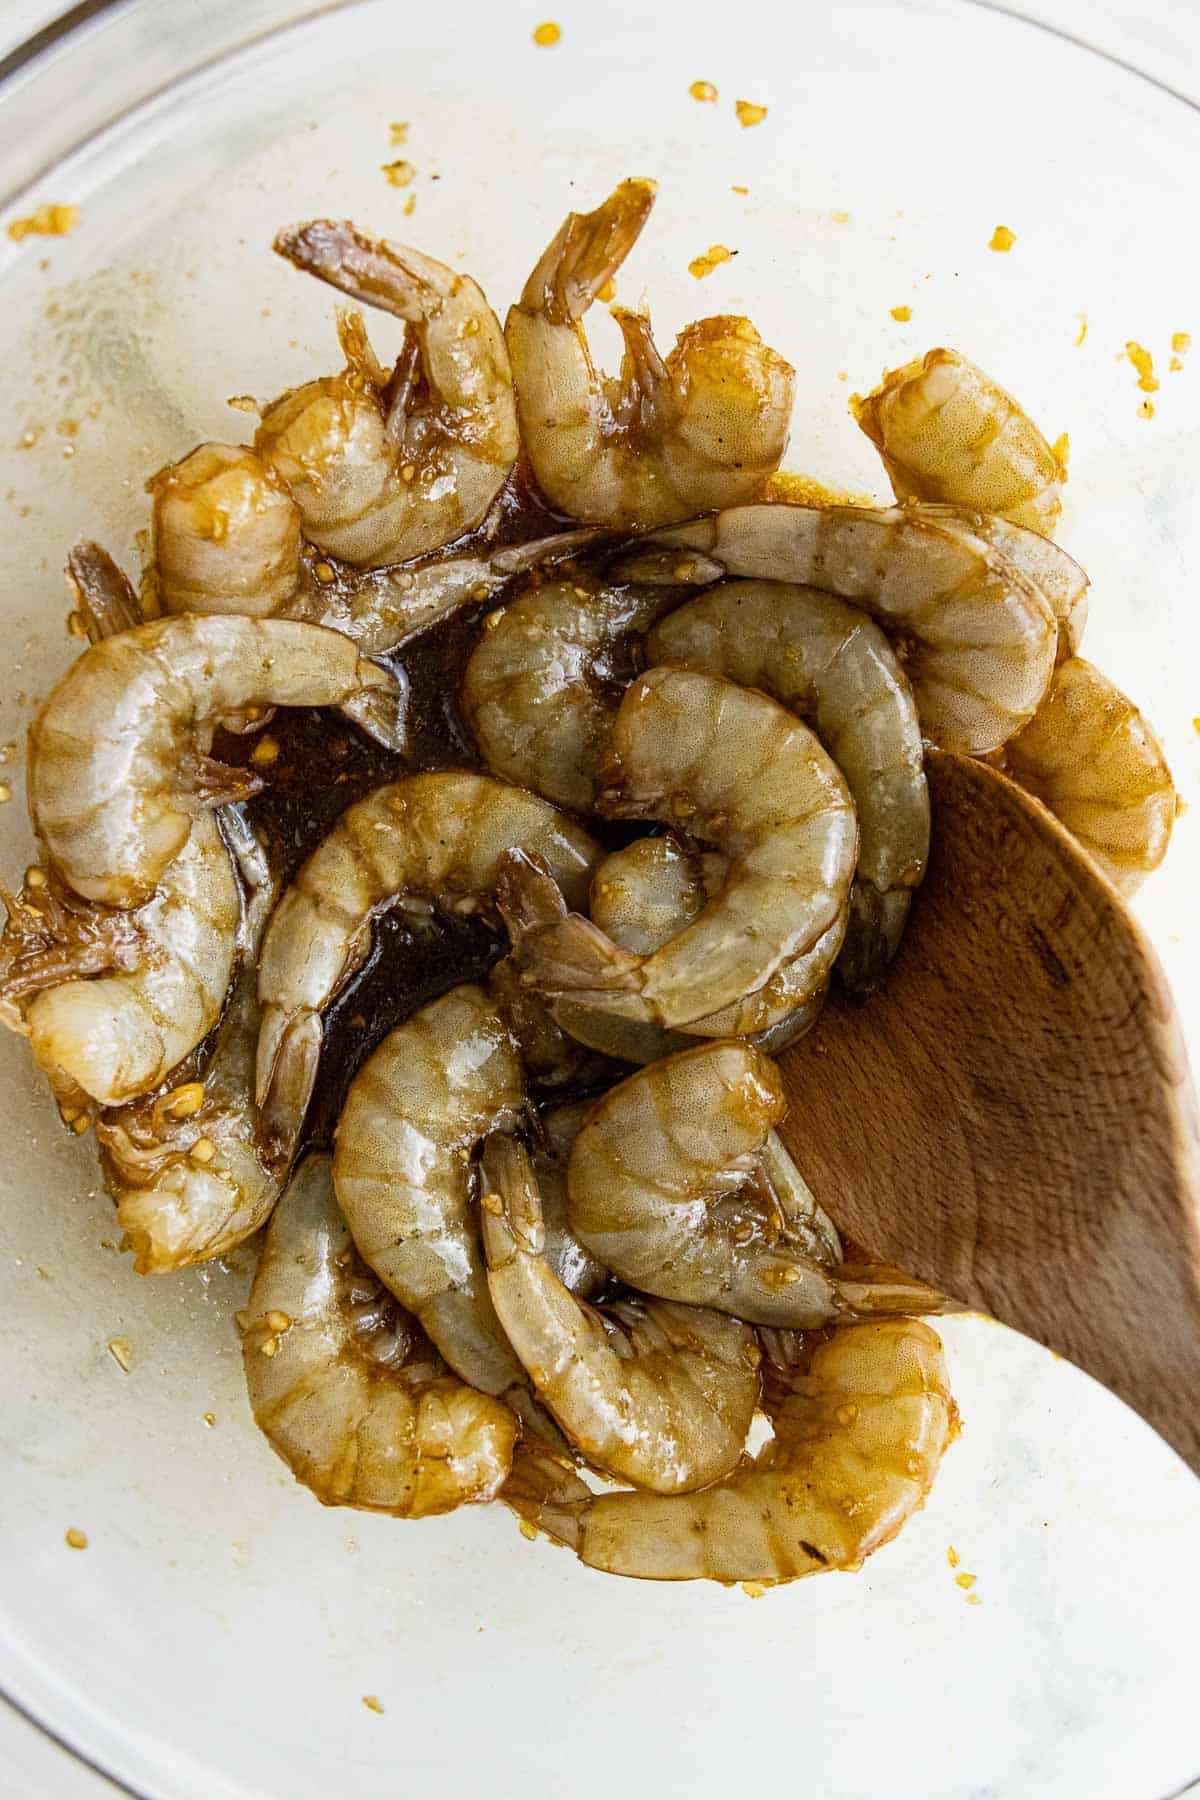 Raw shrimp mixed with soy sauce mixture.